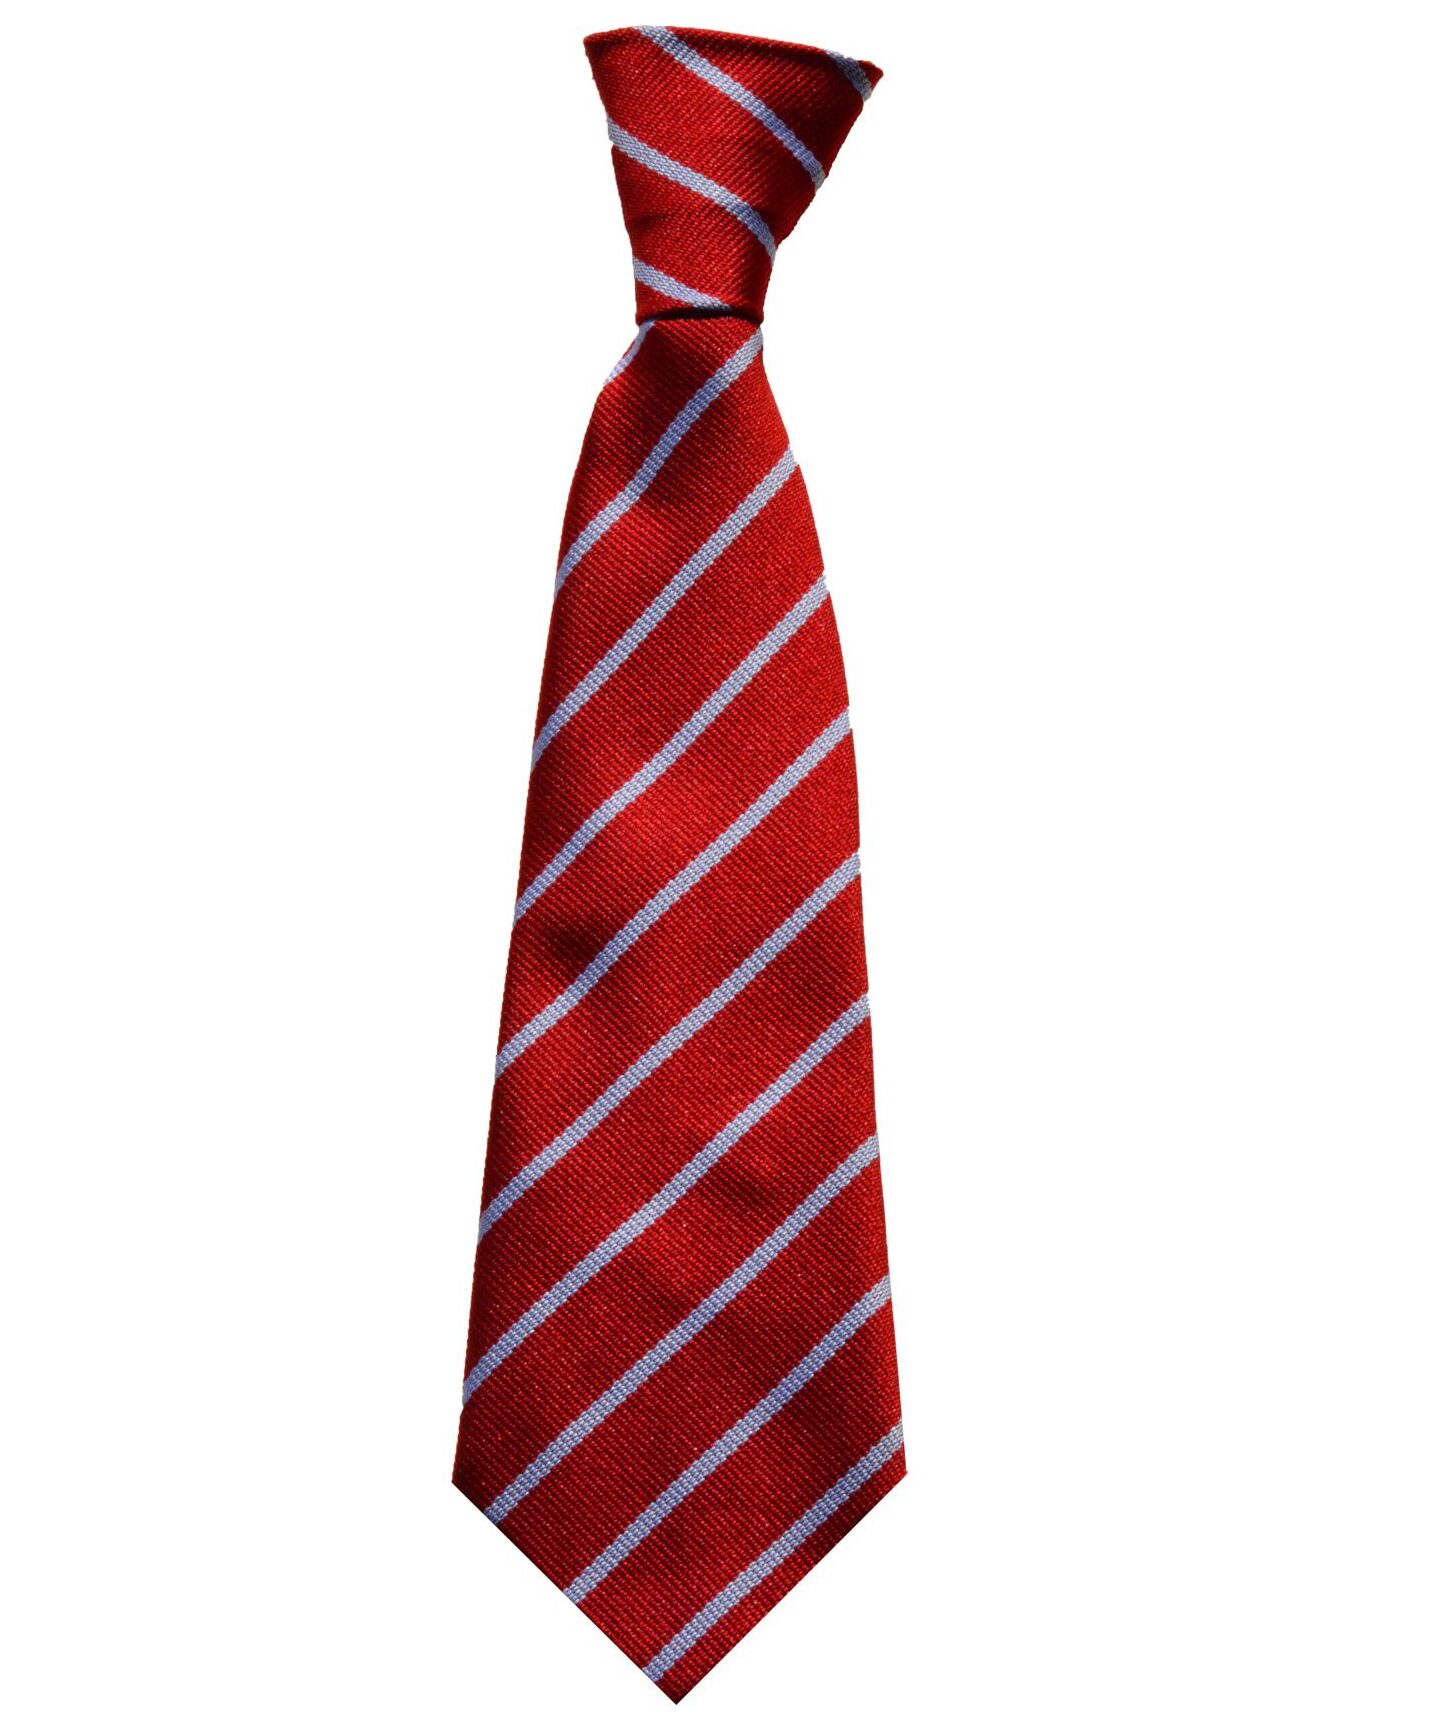 HESWALL PRIMARY SCHOOL ELASTICATED TIE - Cain of Heswall